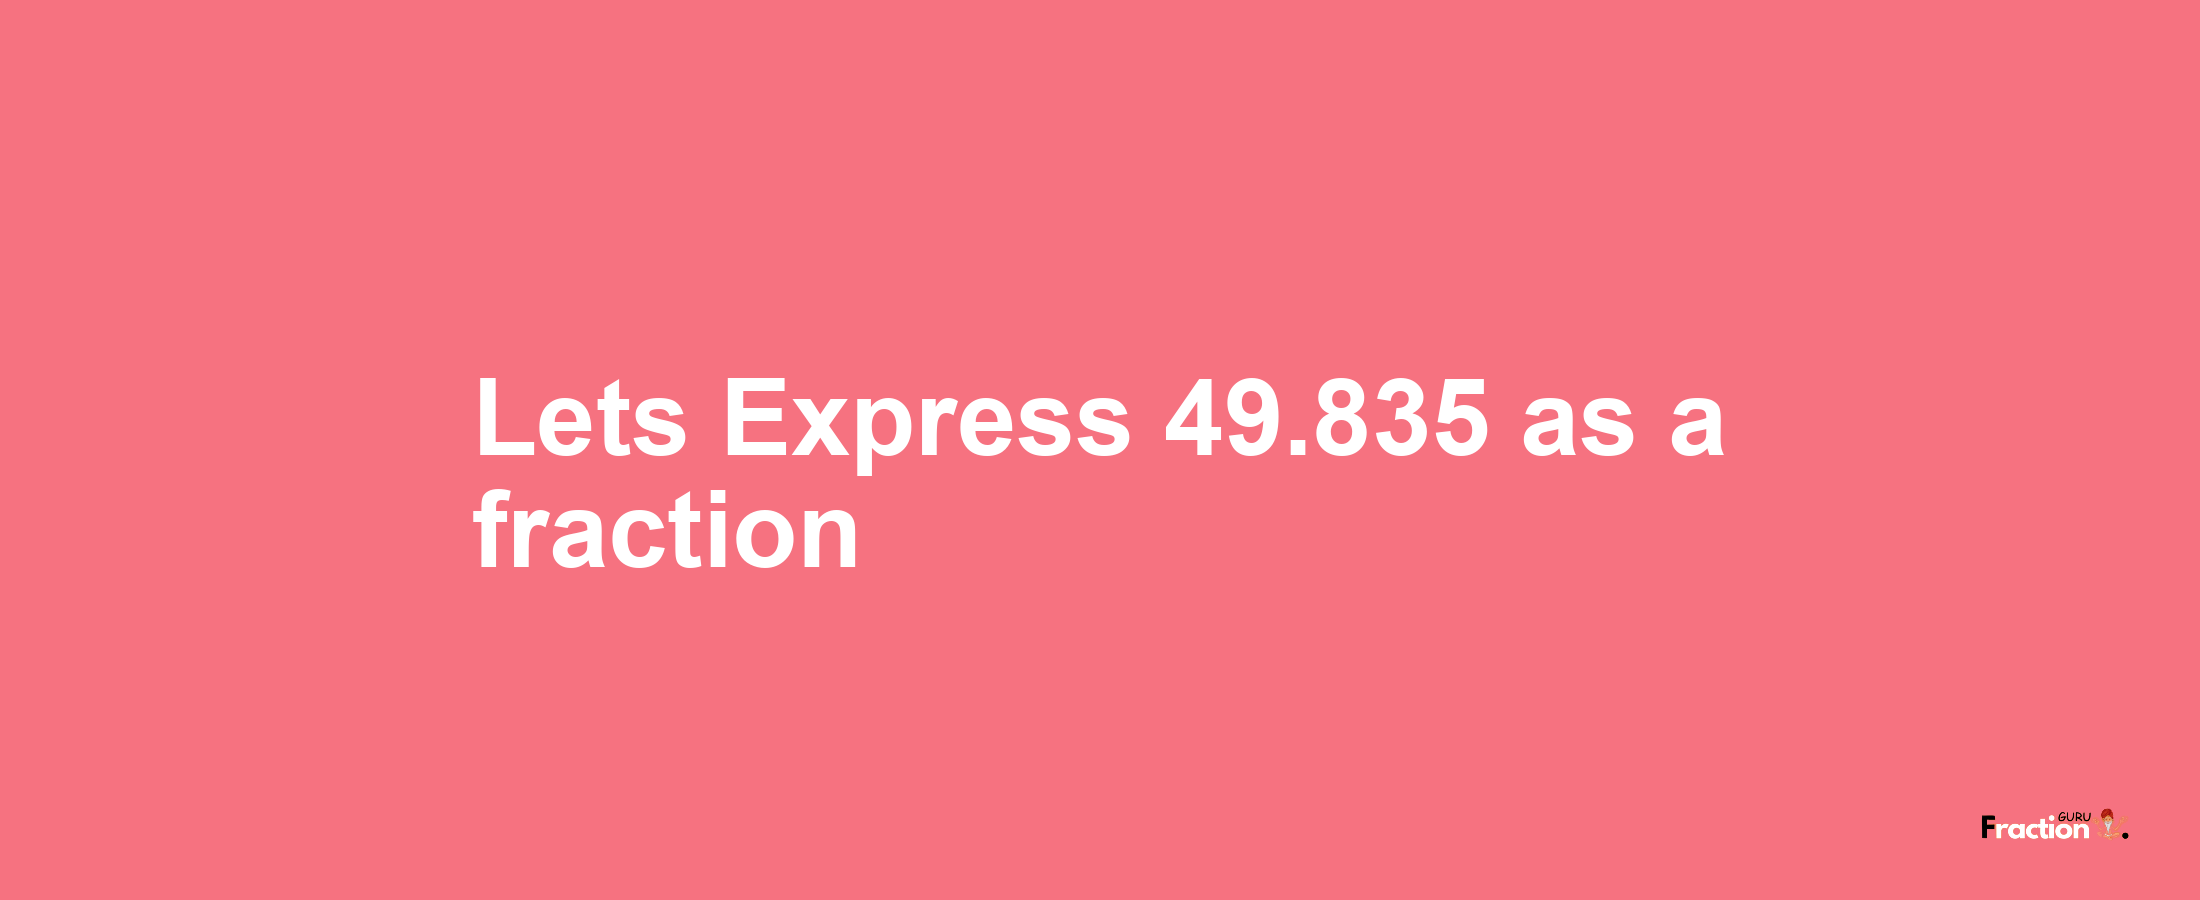 Lets Express 49.835 as afraction